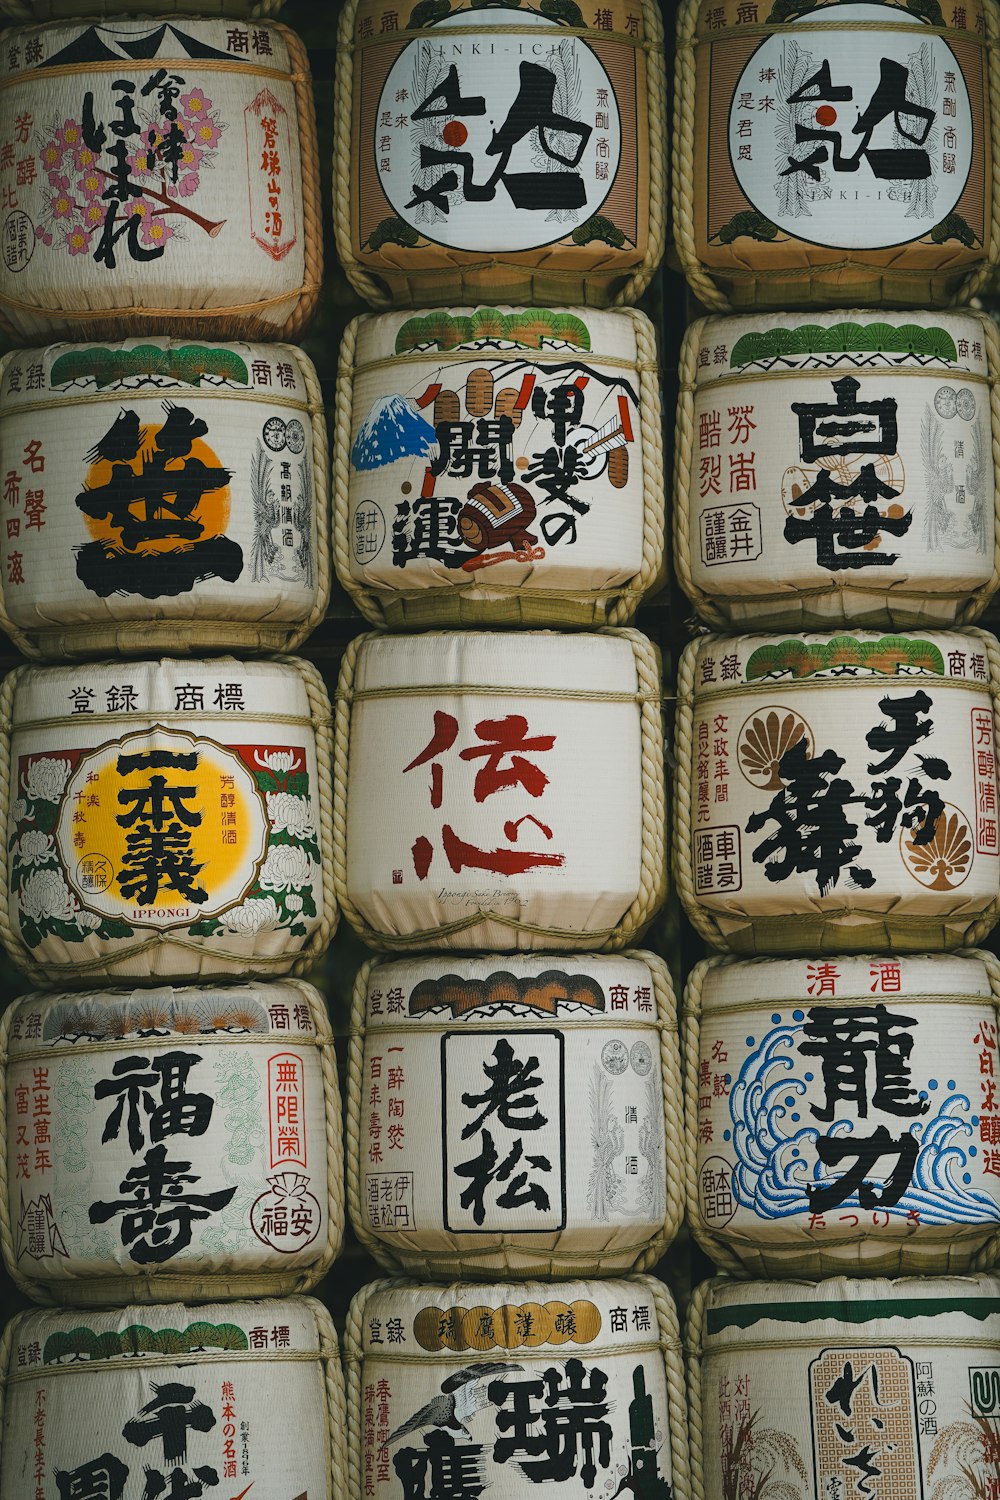 a bunch of containers with asian writing on them